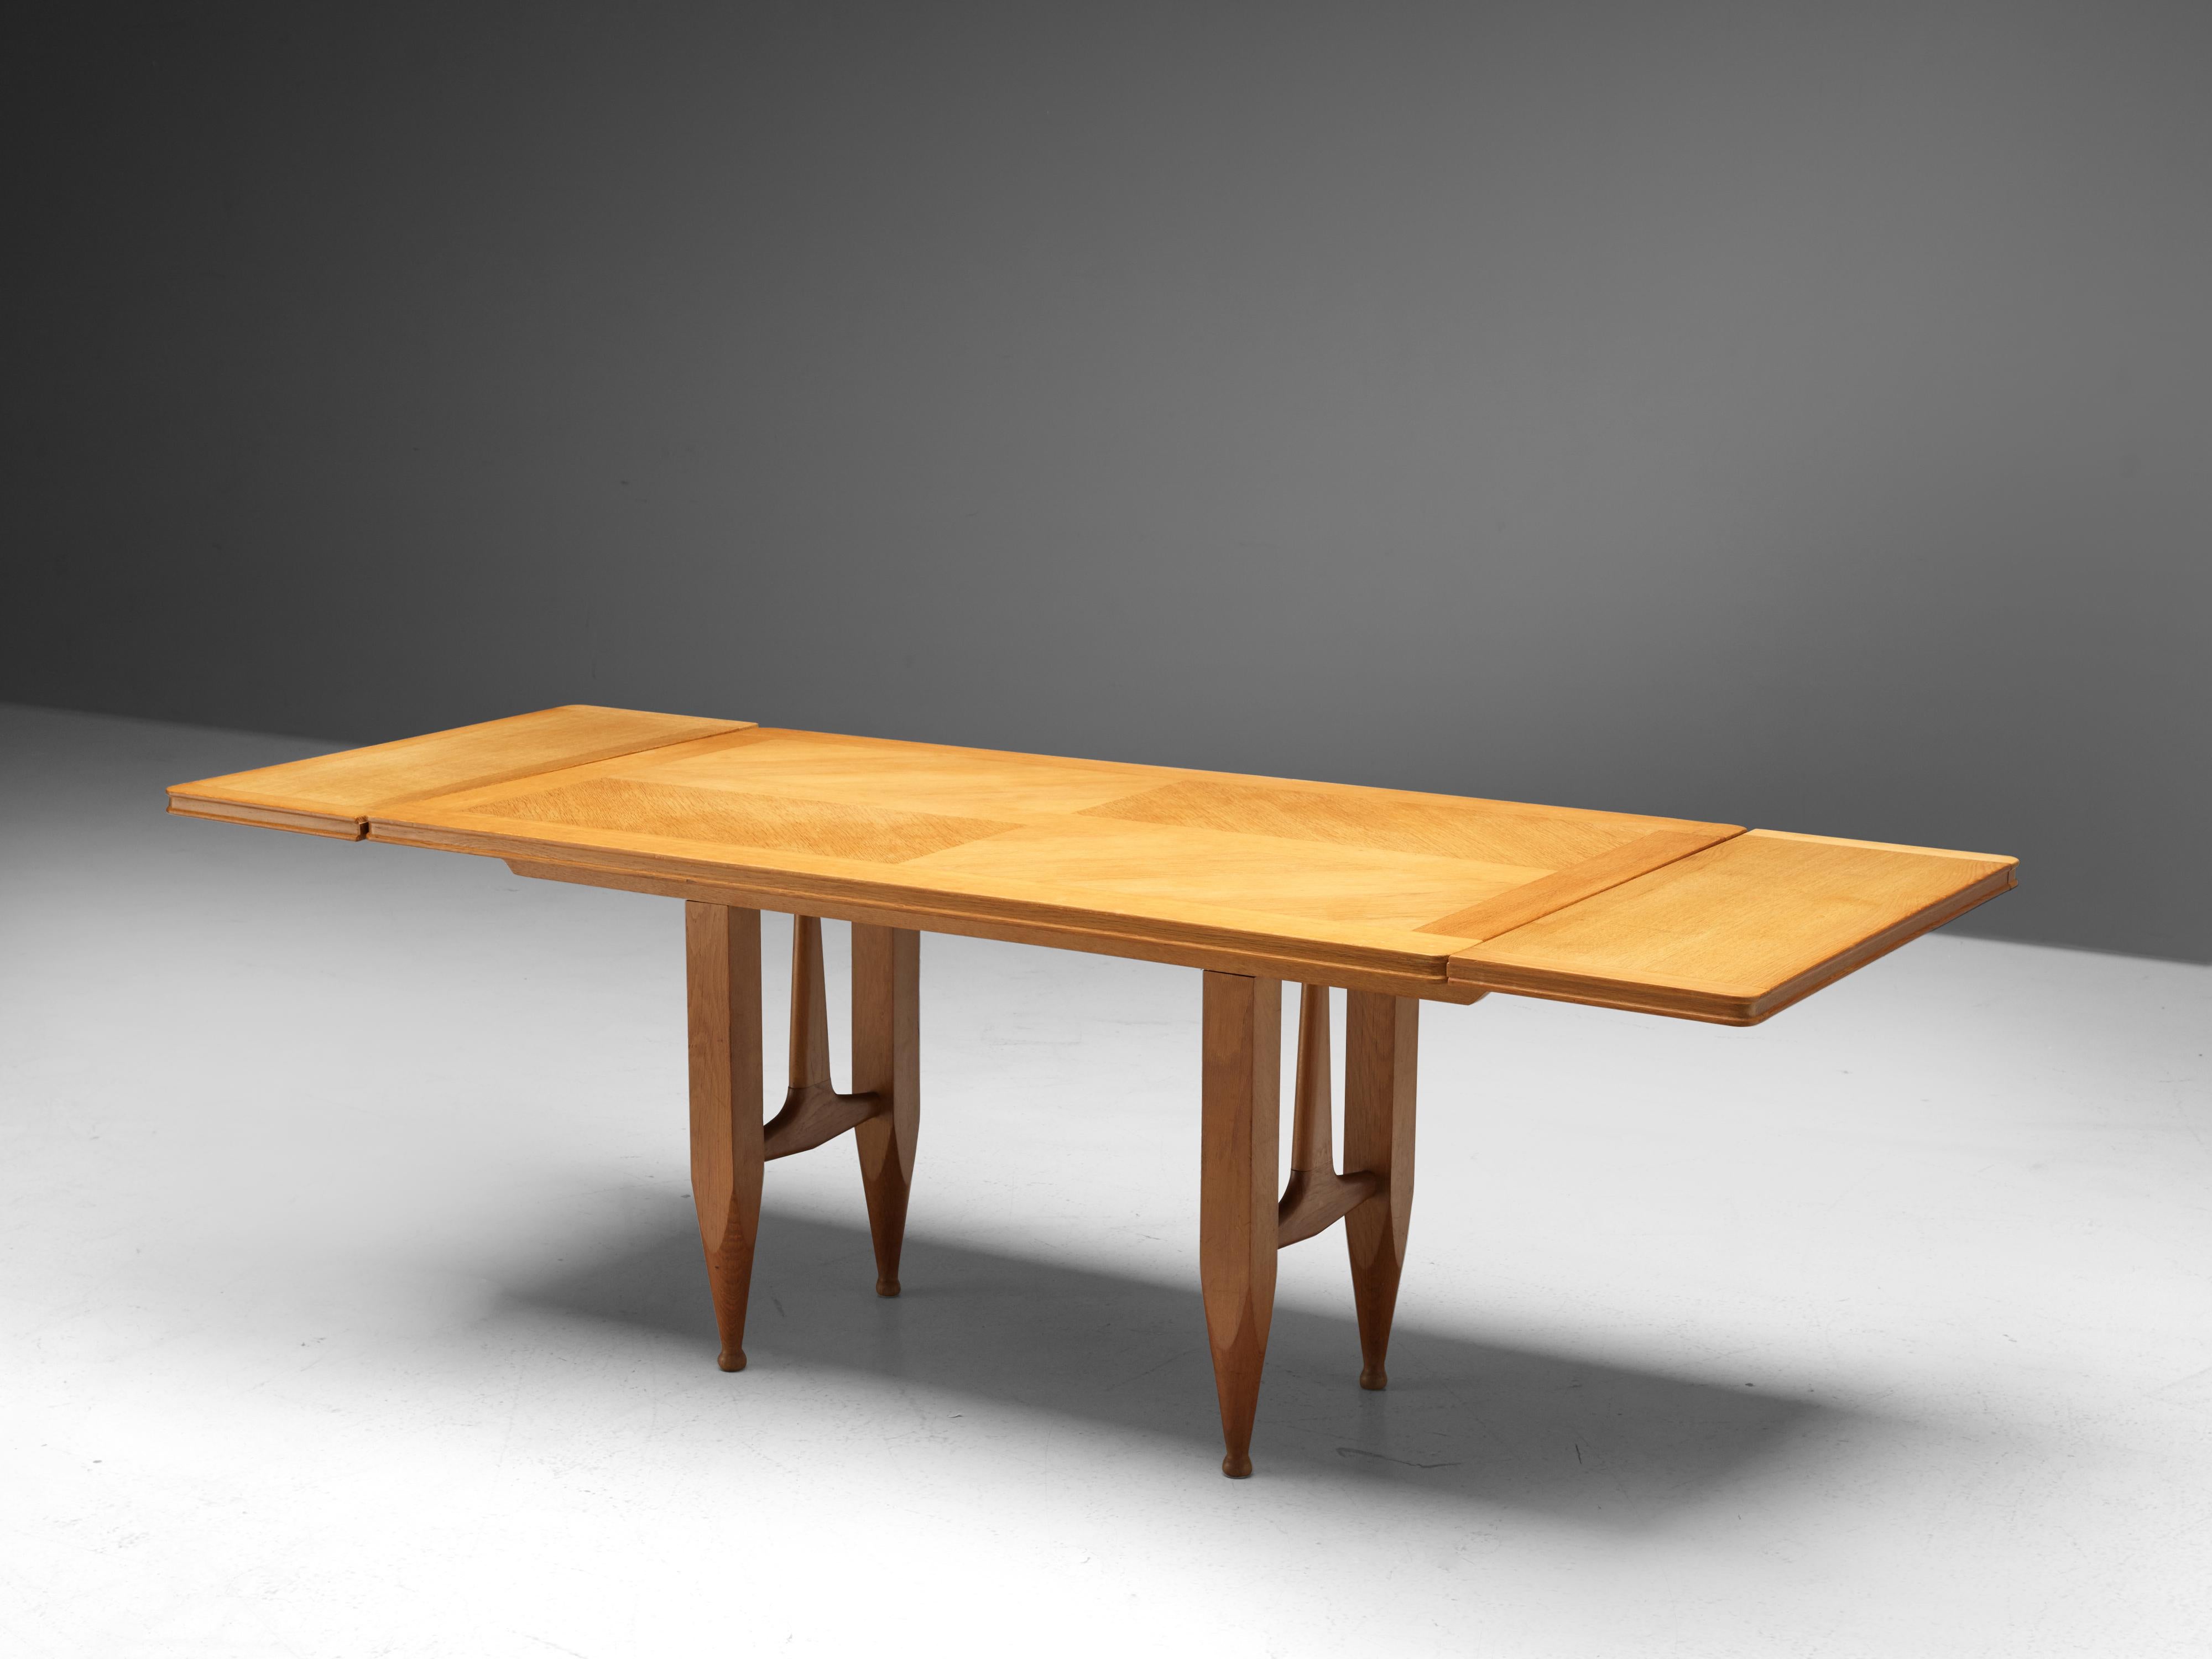 Guillerme et Chambron for Votre Maison, extendable dining table, oak, 1960s

Rectangular shaped dining table with inlayed top. This extendable table in solid oak comes with two optional leaves, which makes it a very versatile item. The sculptural